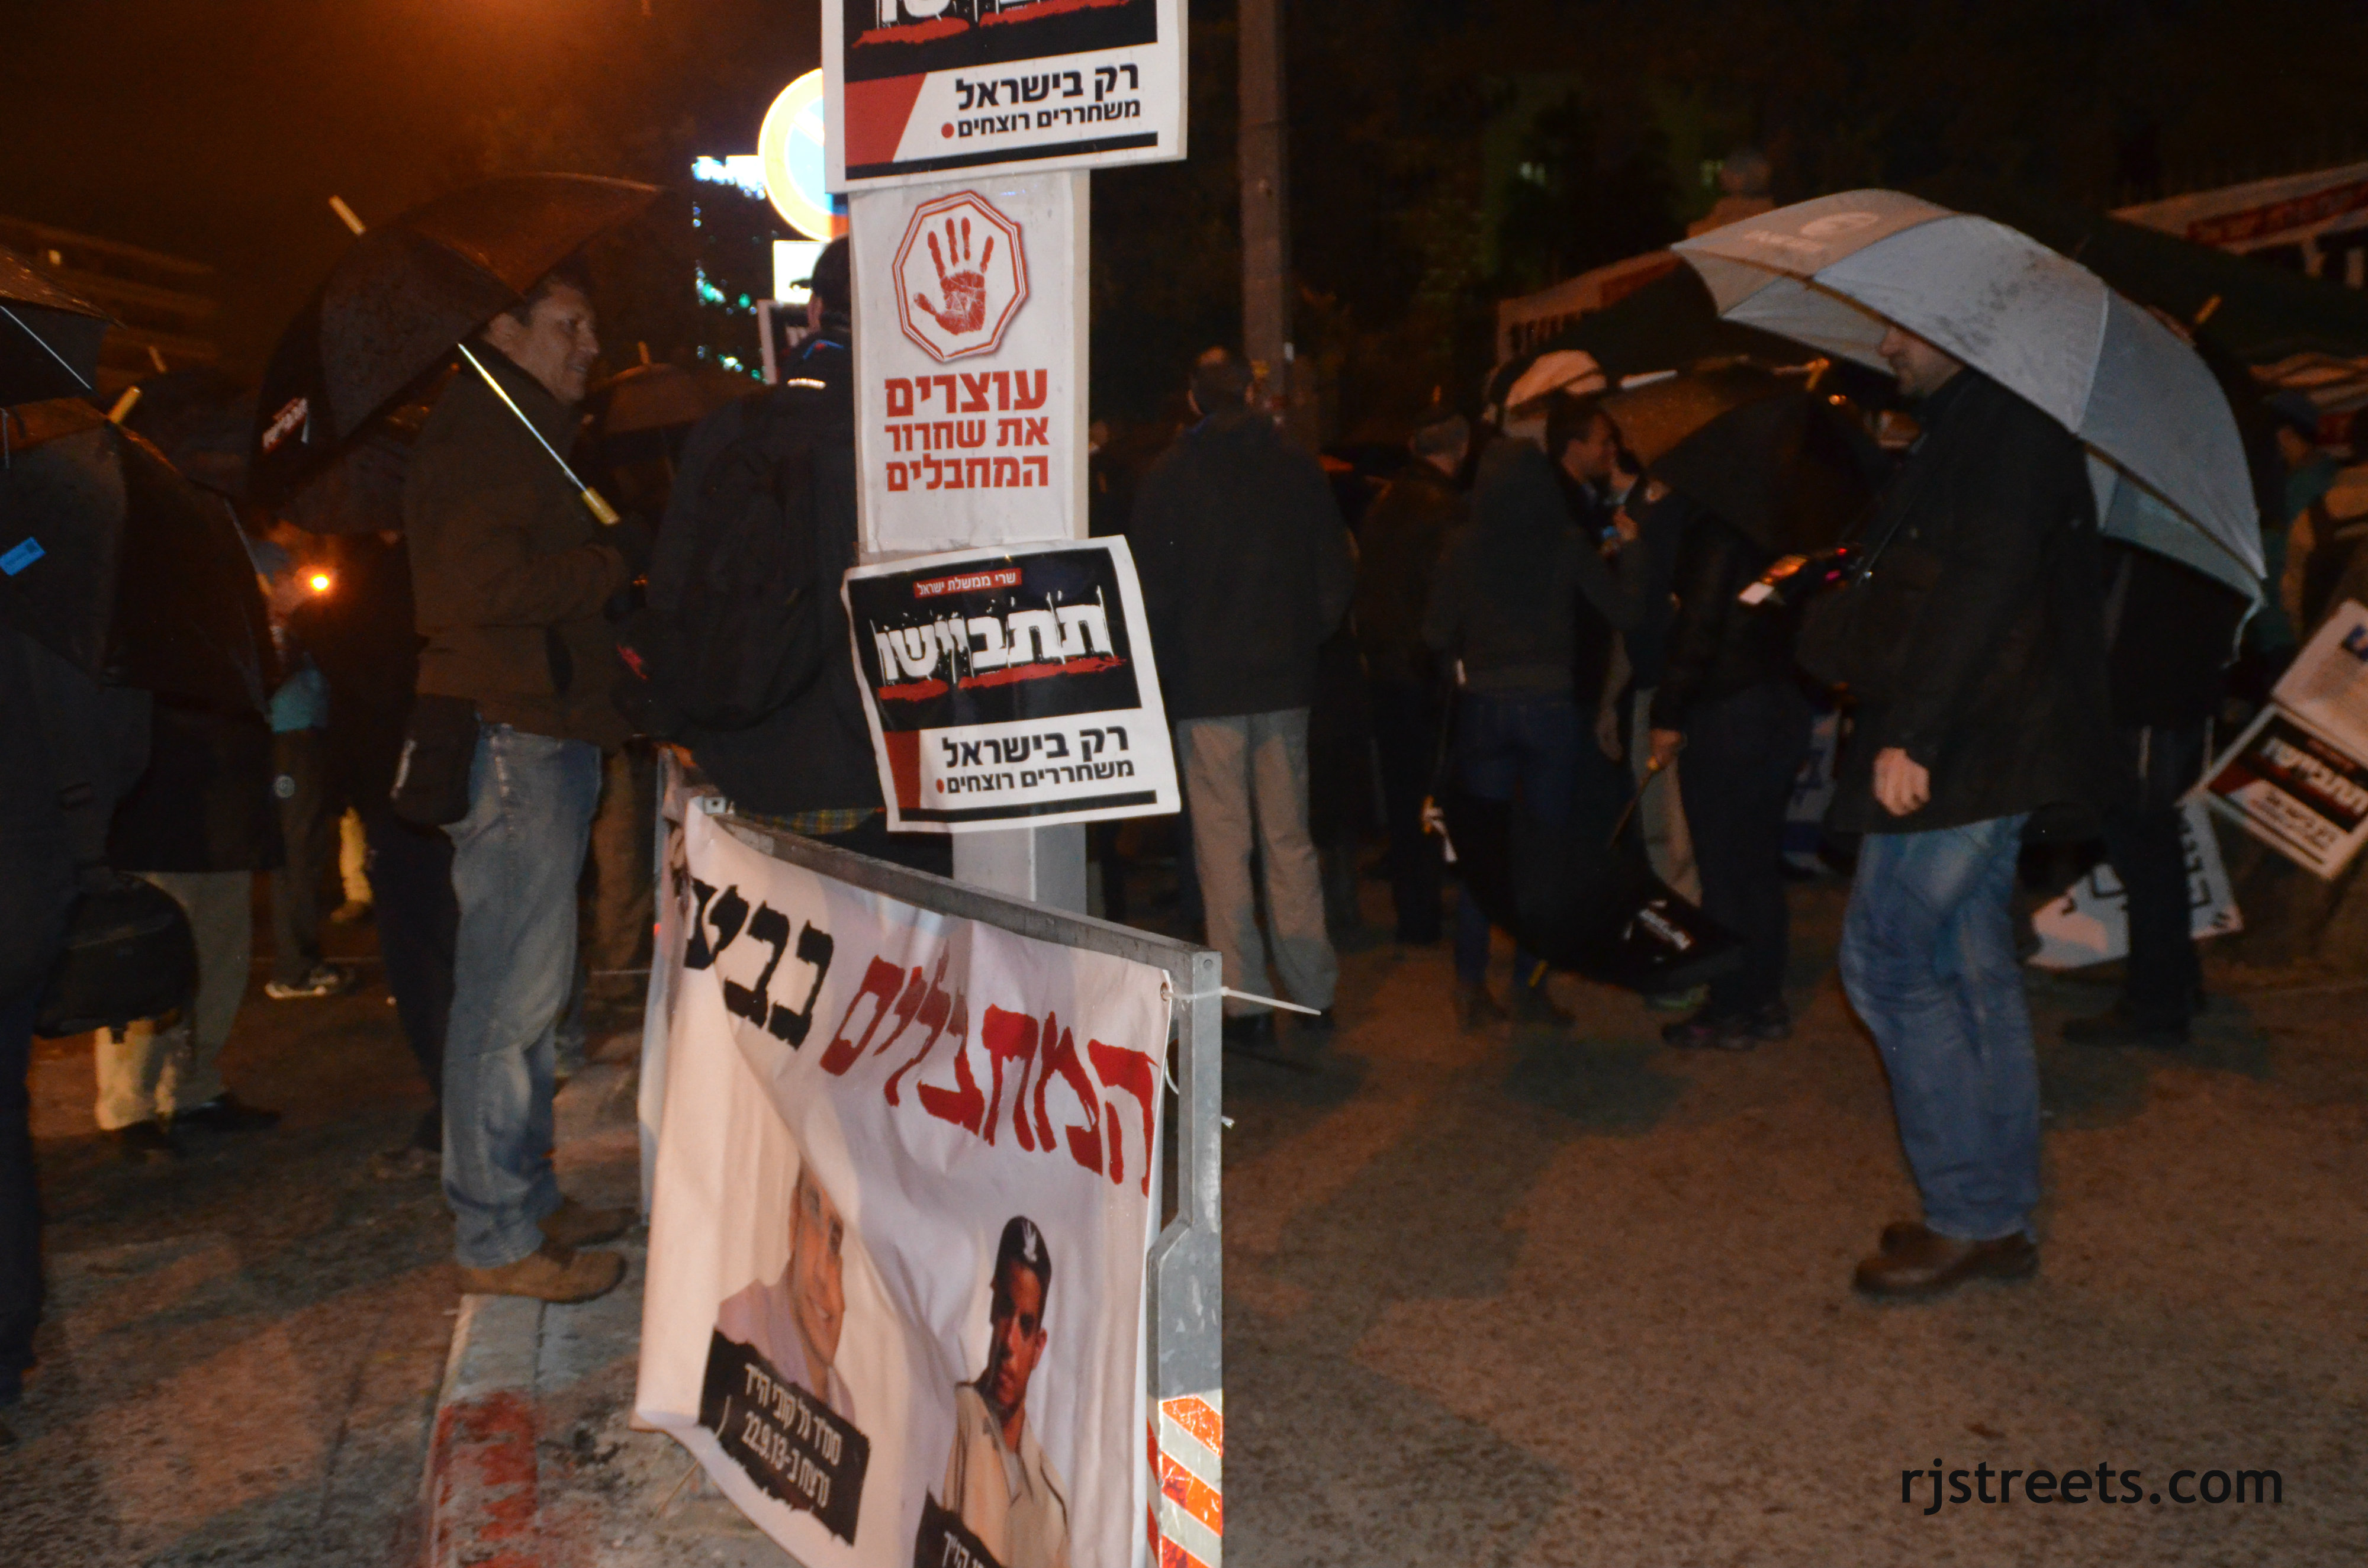 picture protest at night, image Israel protets, photo protest banners.